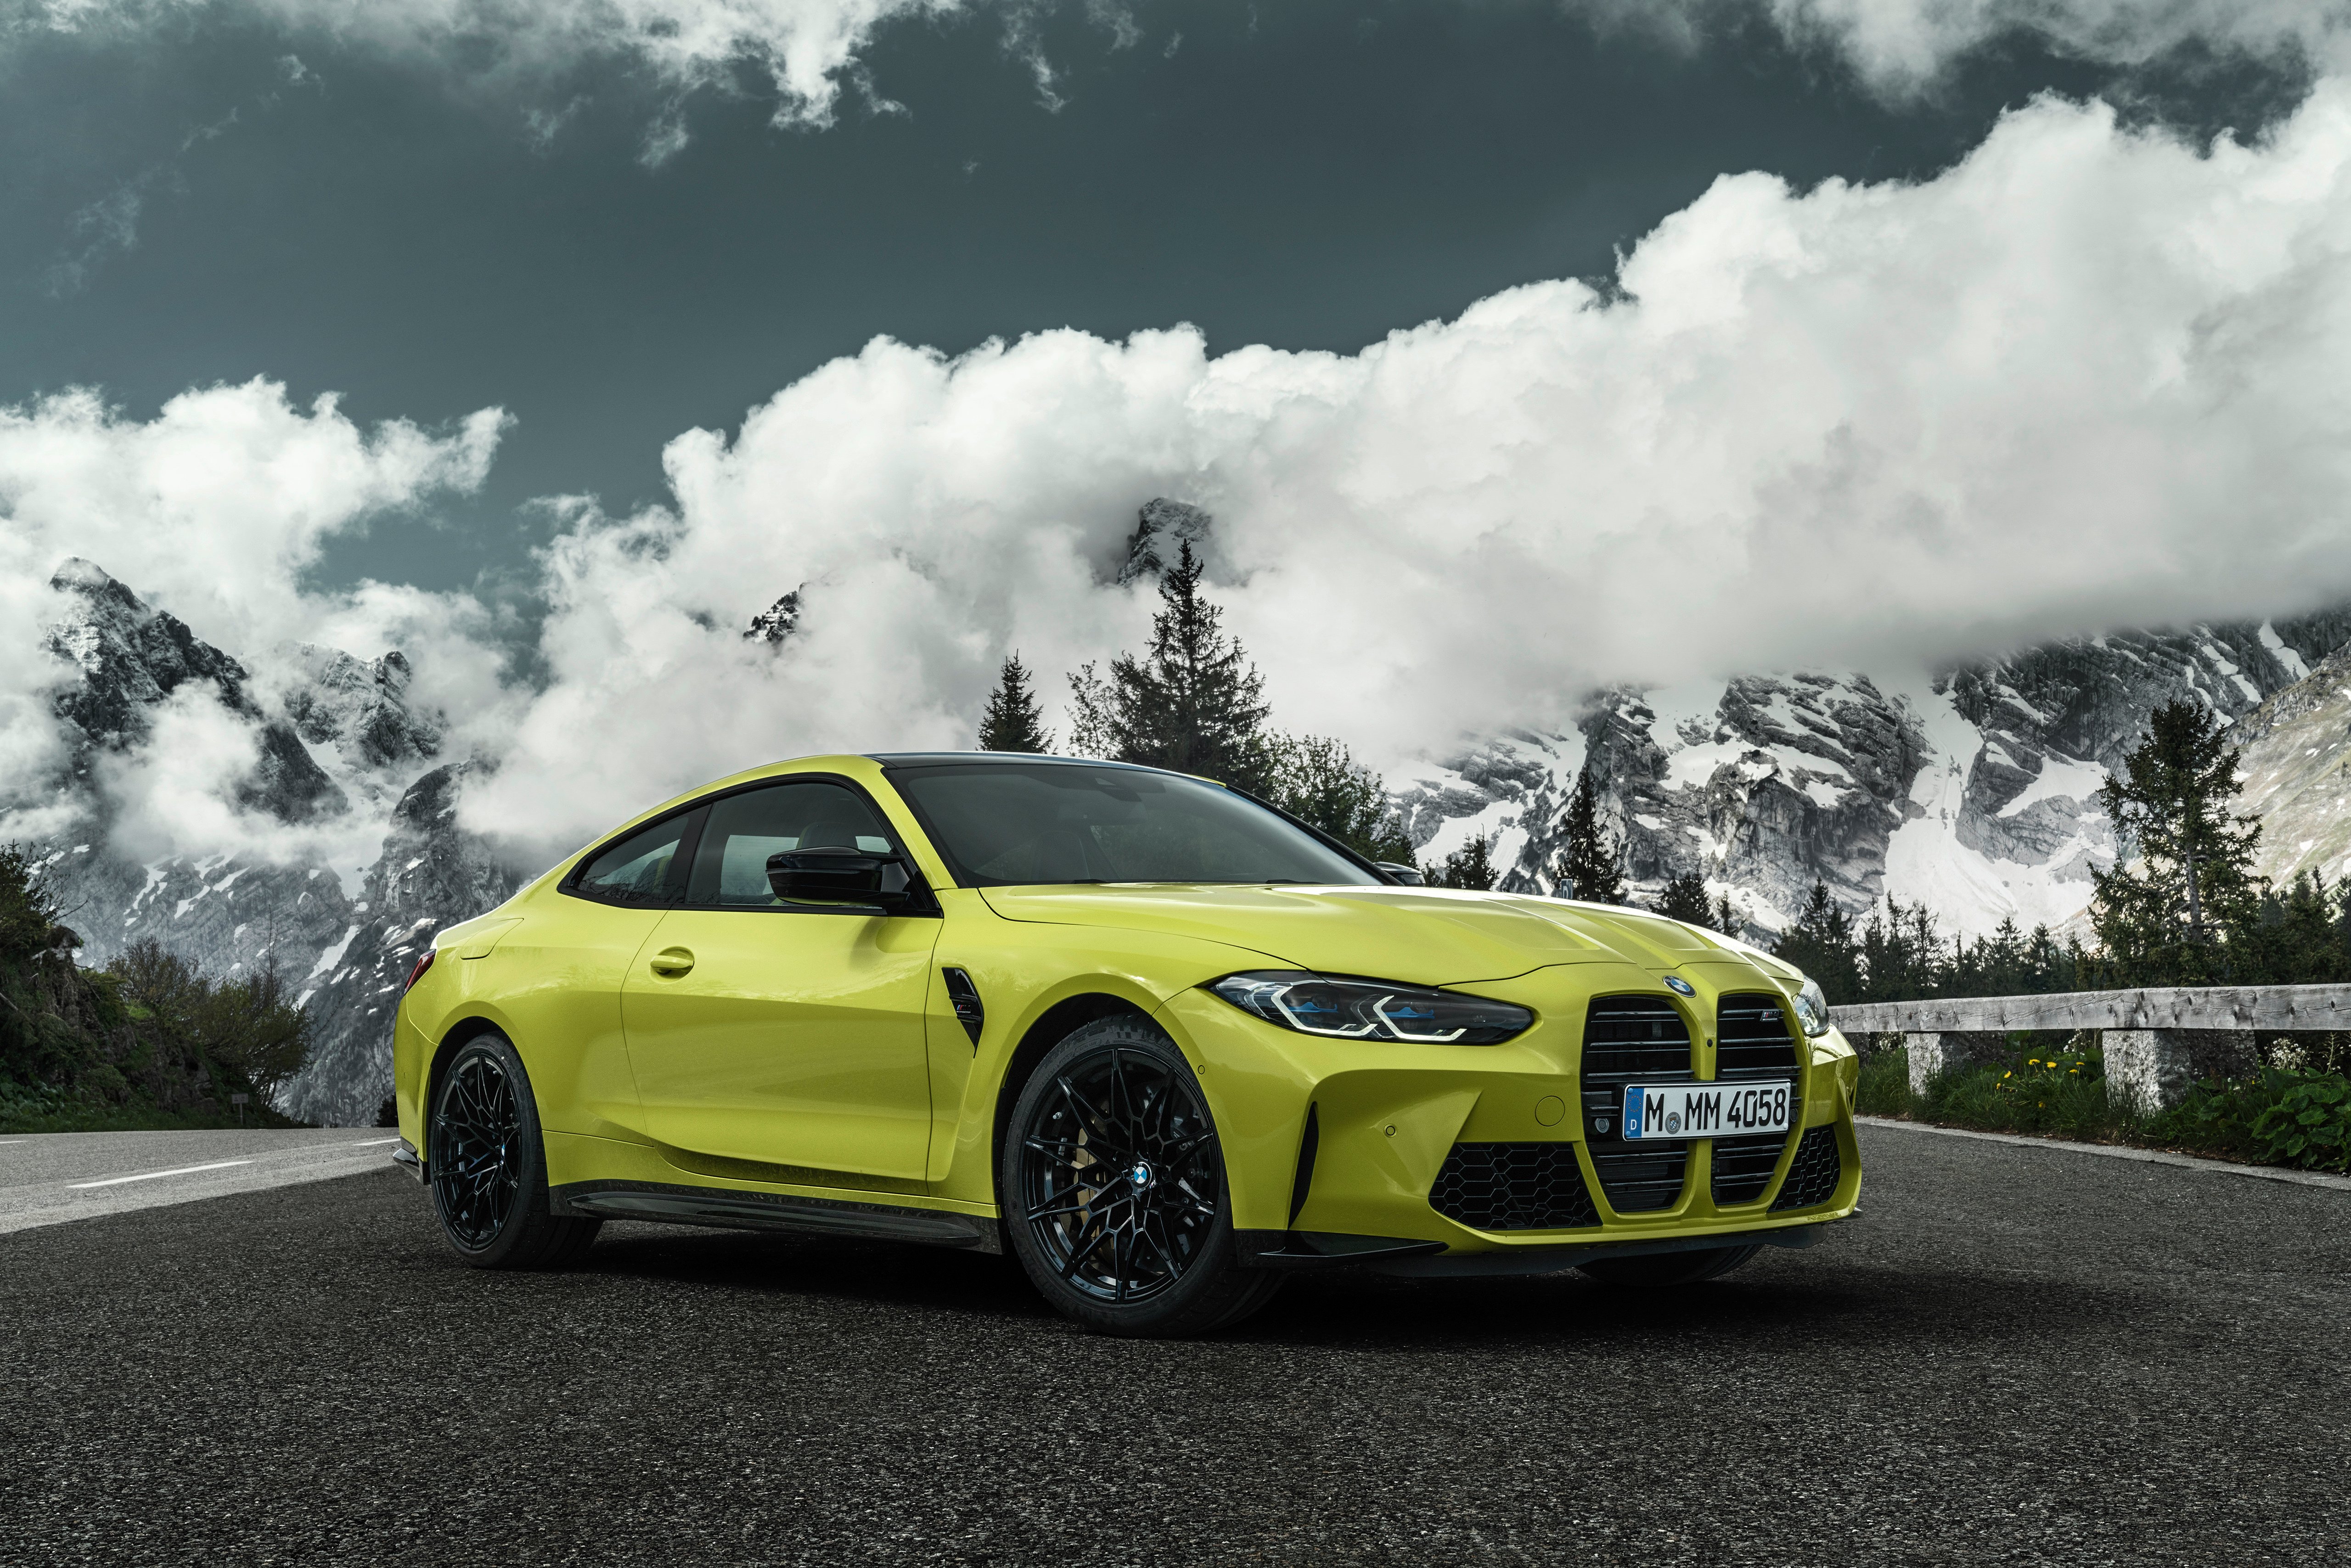 BMW M4 Competition Wallpaper 4K, 5K, Cars